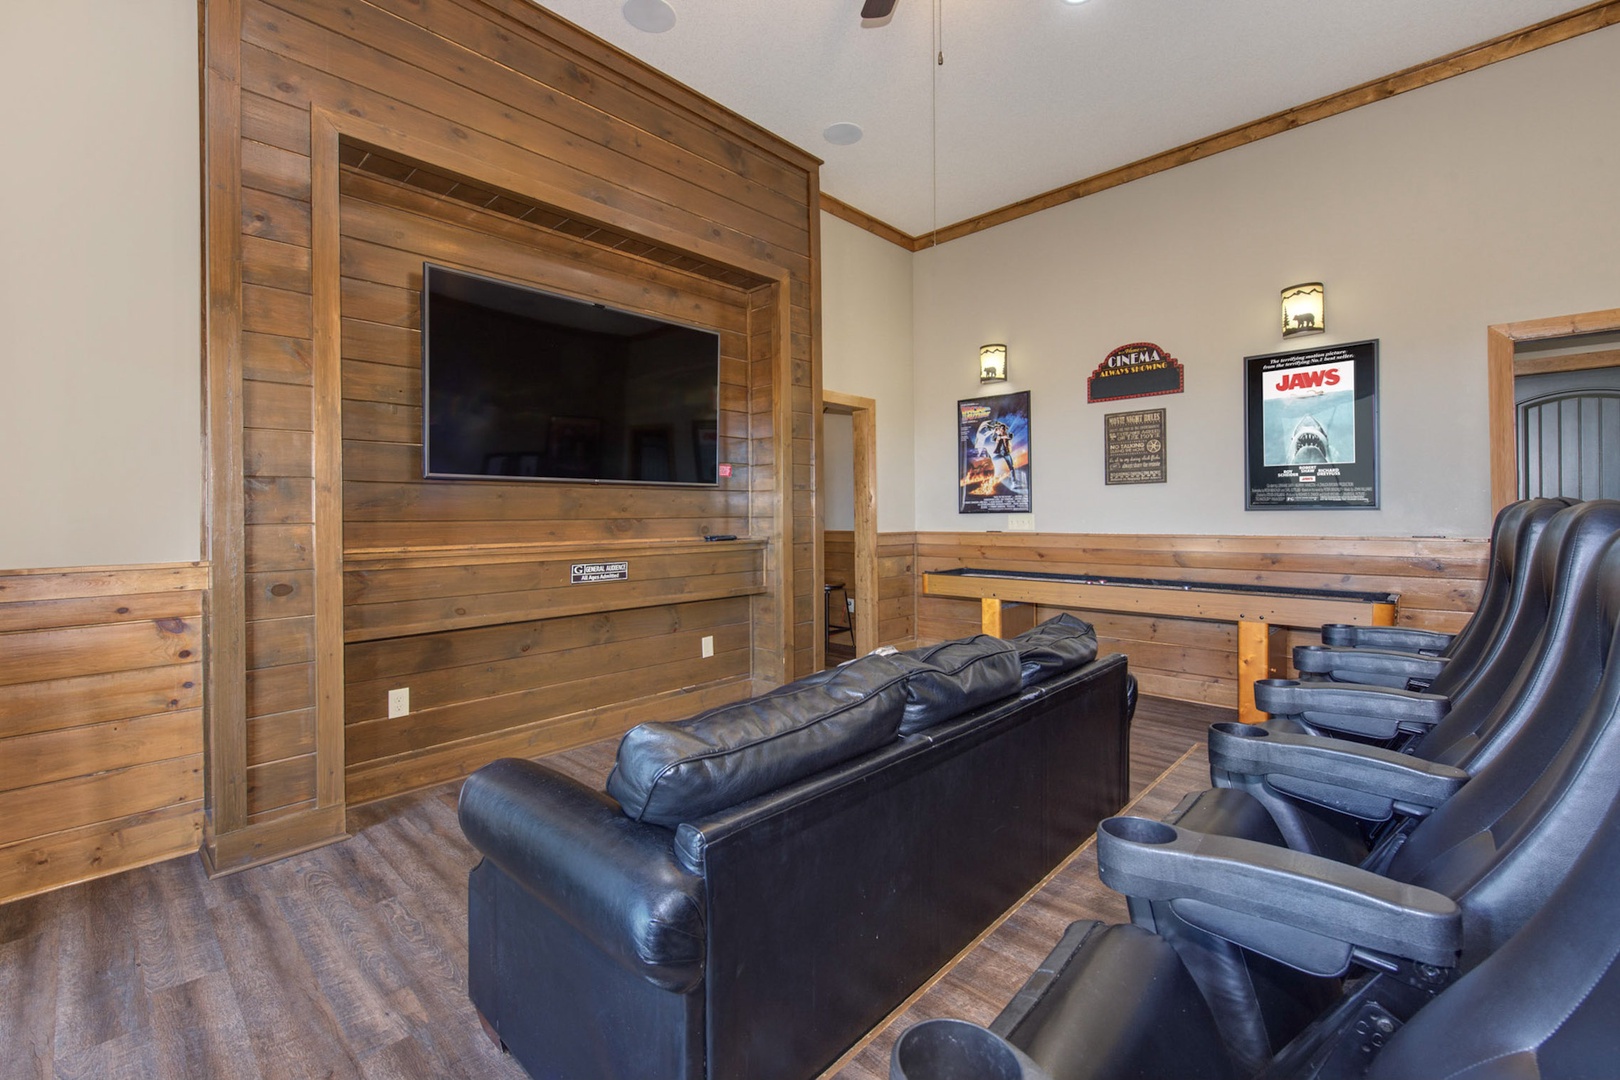 Movie & shuffleboard lovers are sure to love the downstairs theater room!